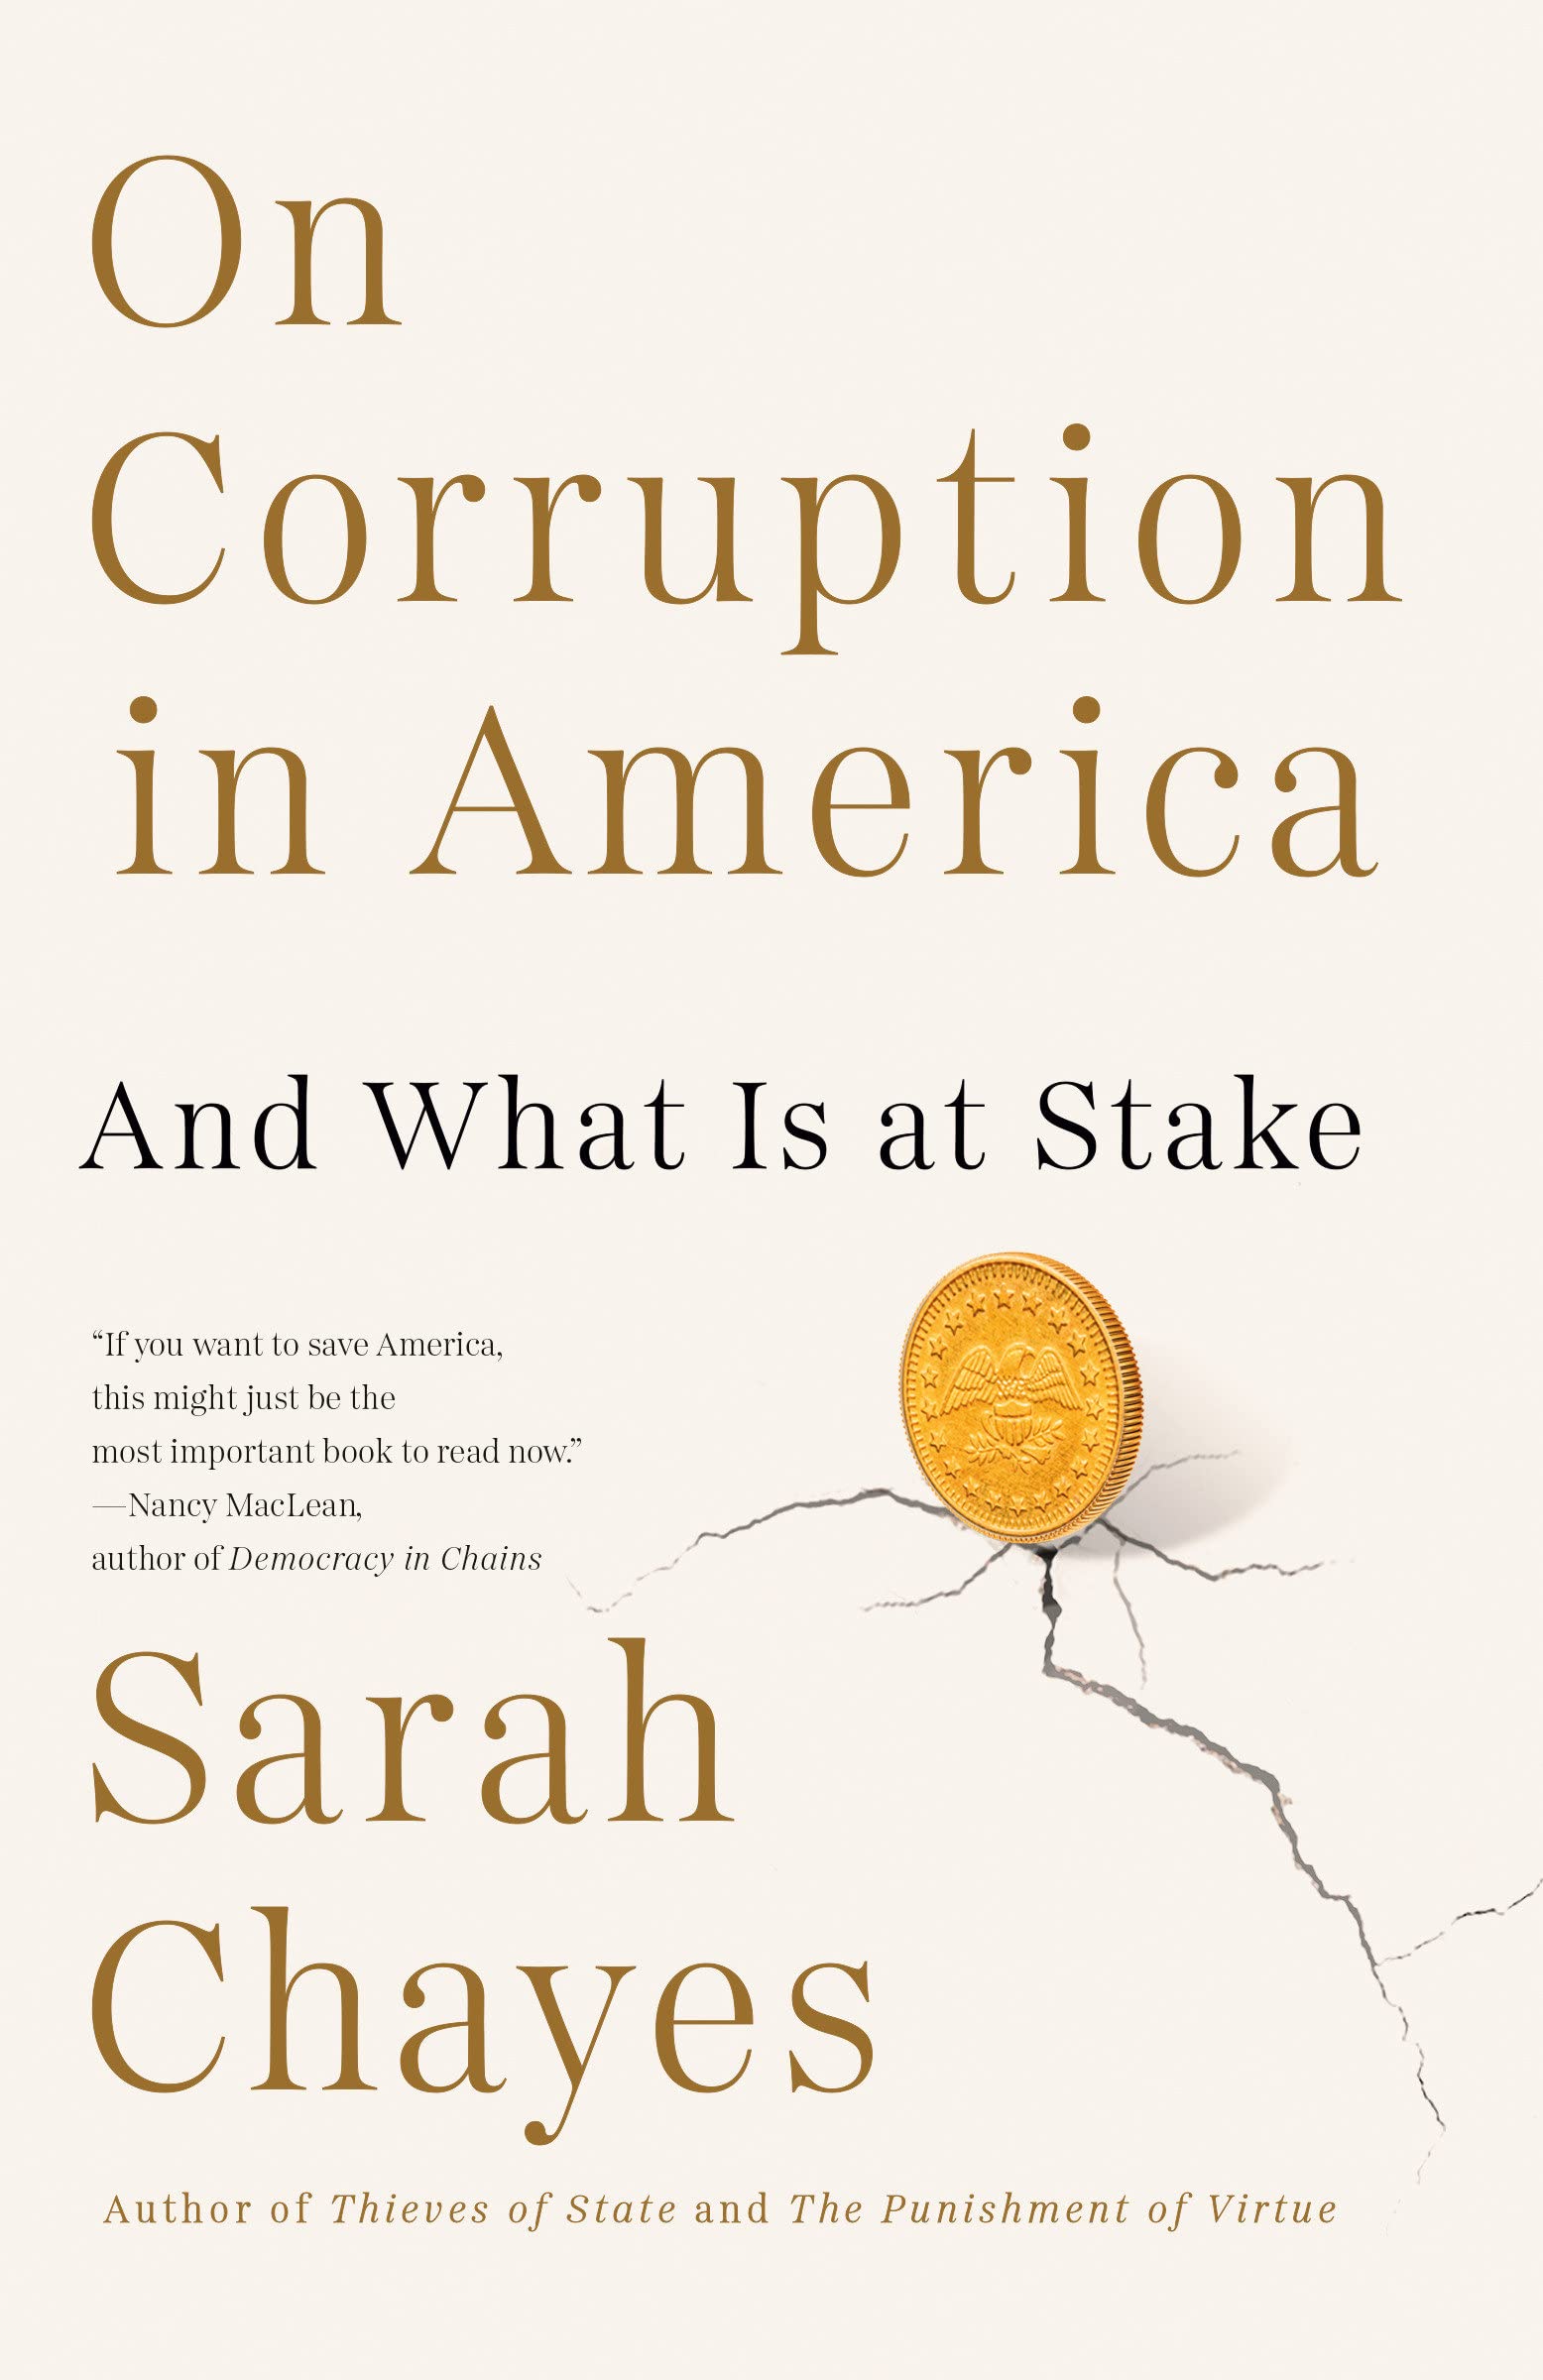 On Corruption book cover